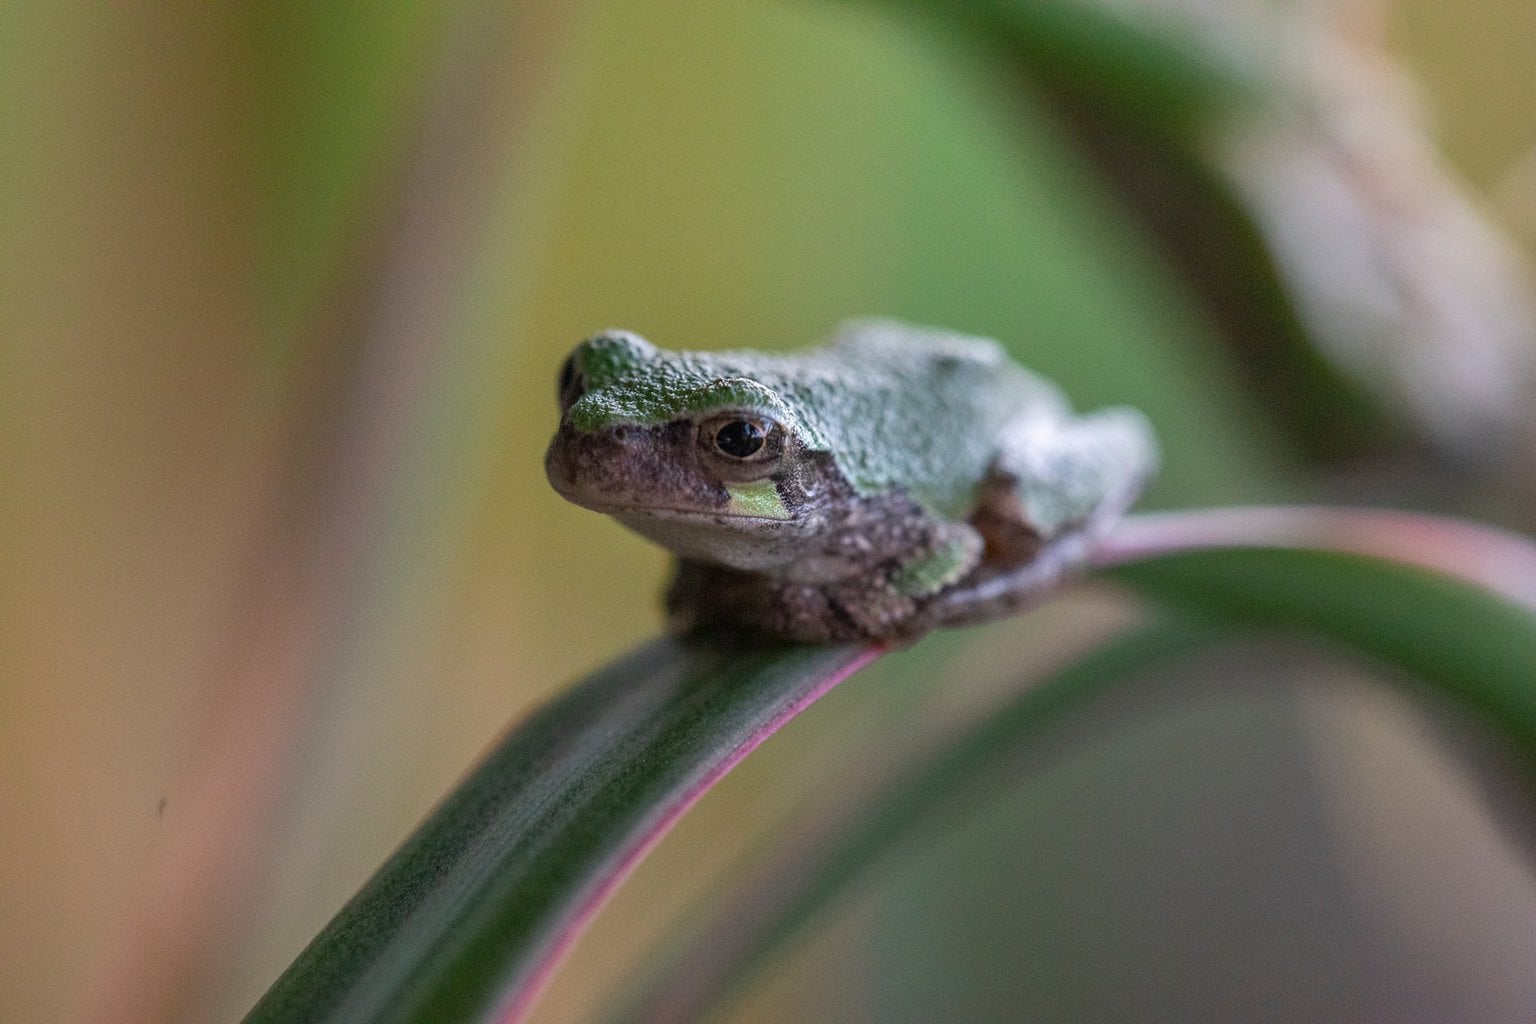 Pea-sized frog rates among world's tiniest